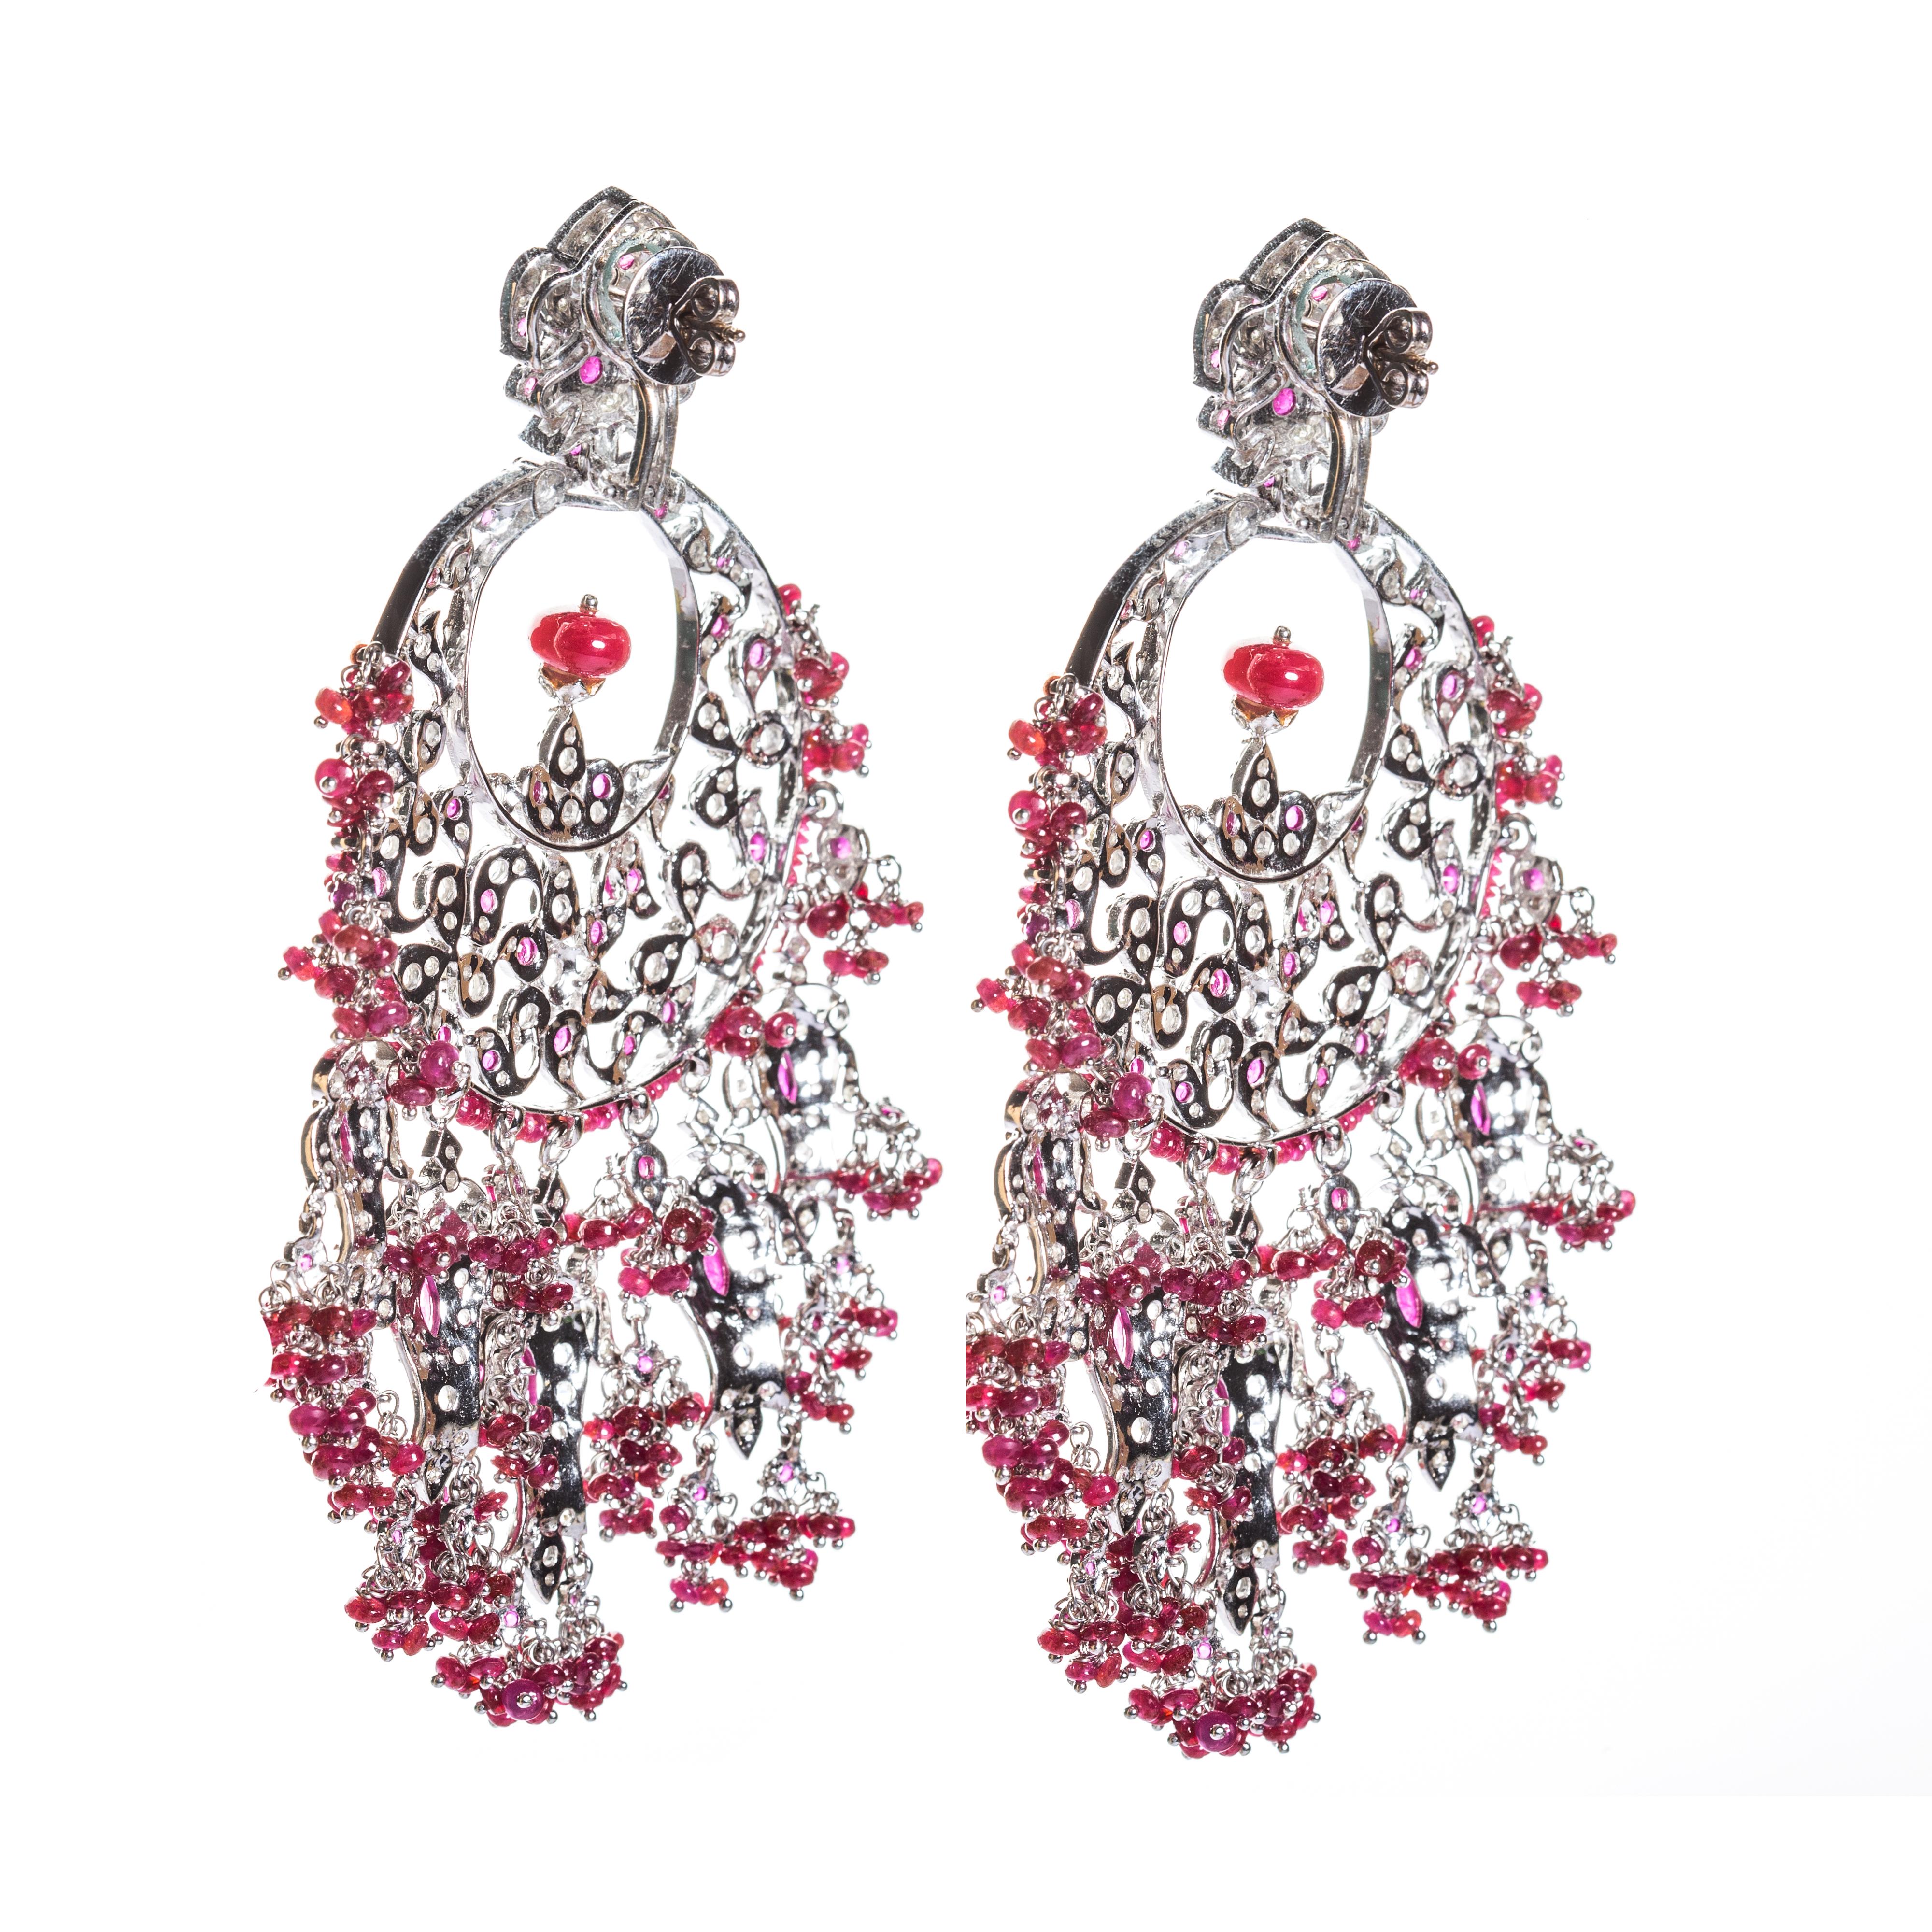 Brilliant Cut KimK Ruby Earrings with Diamonds and White Sapphires For Sale